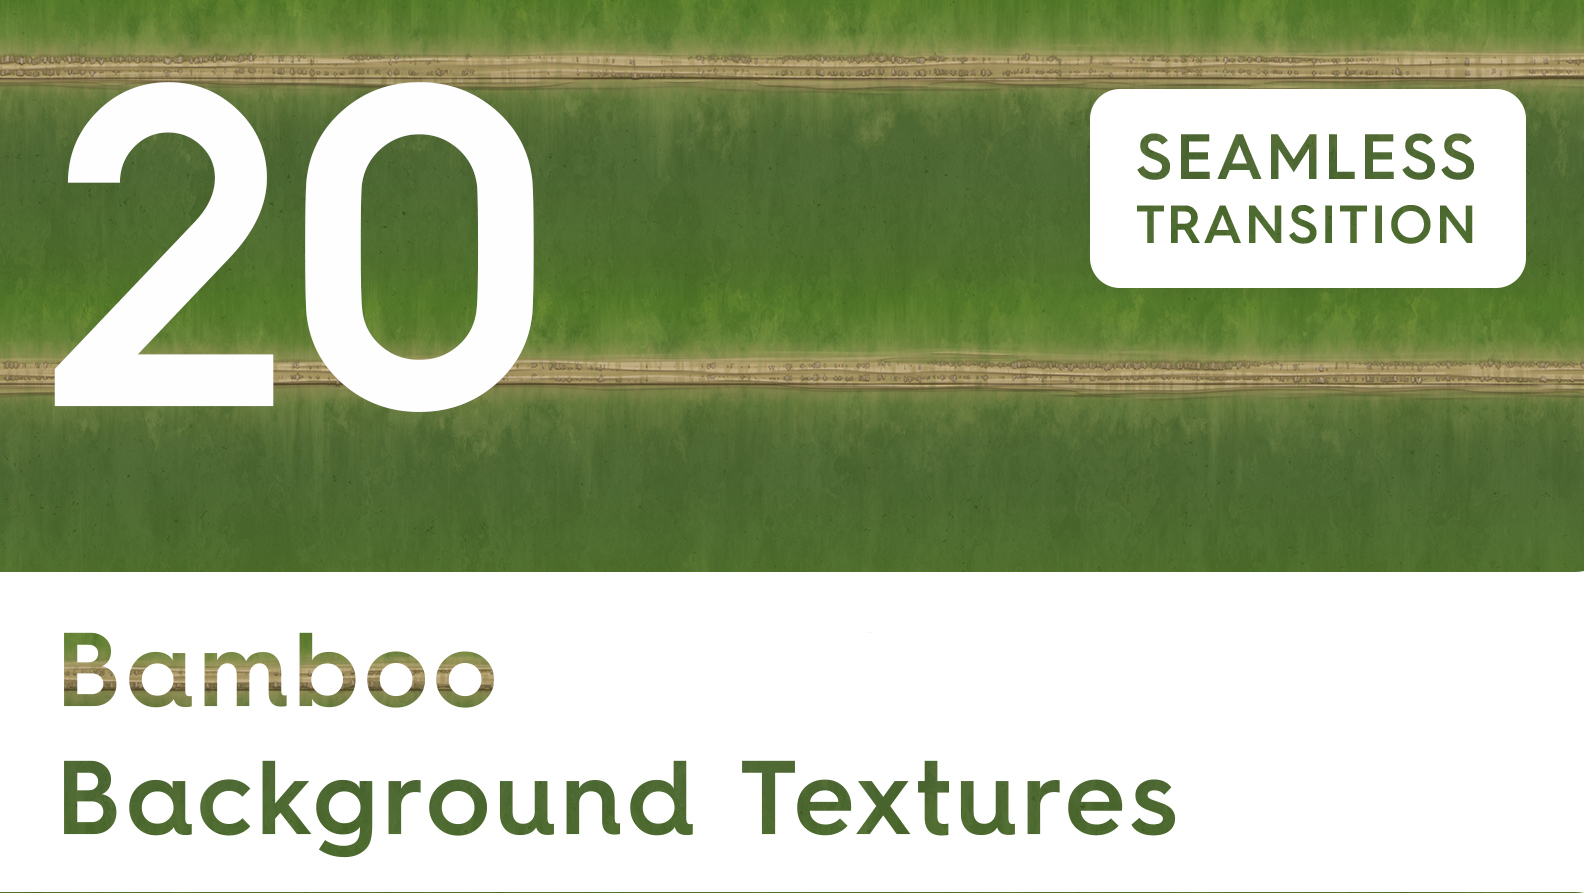 Natural Bamboo Texture Background Stock Photo - Download Image Now